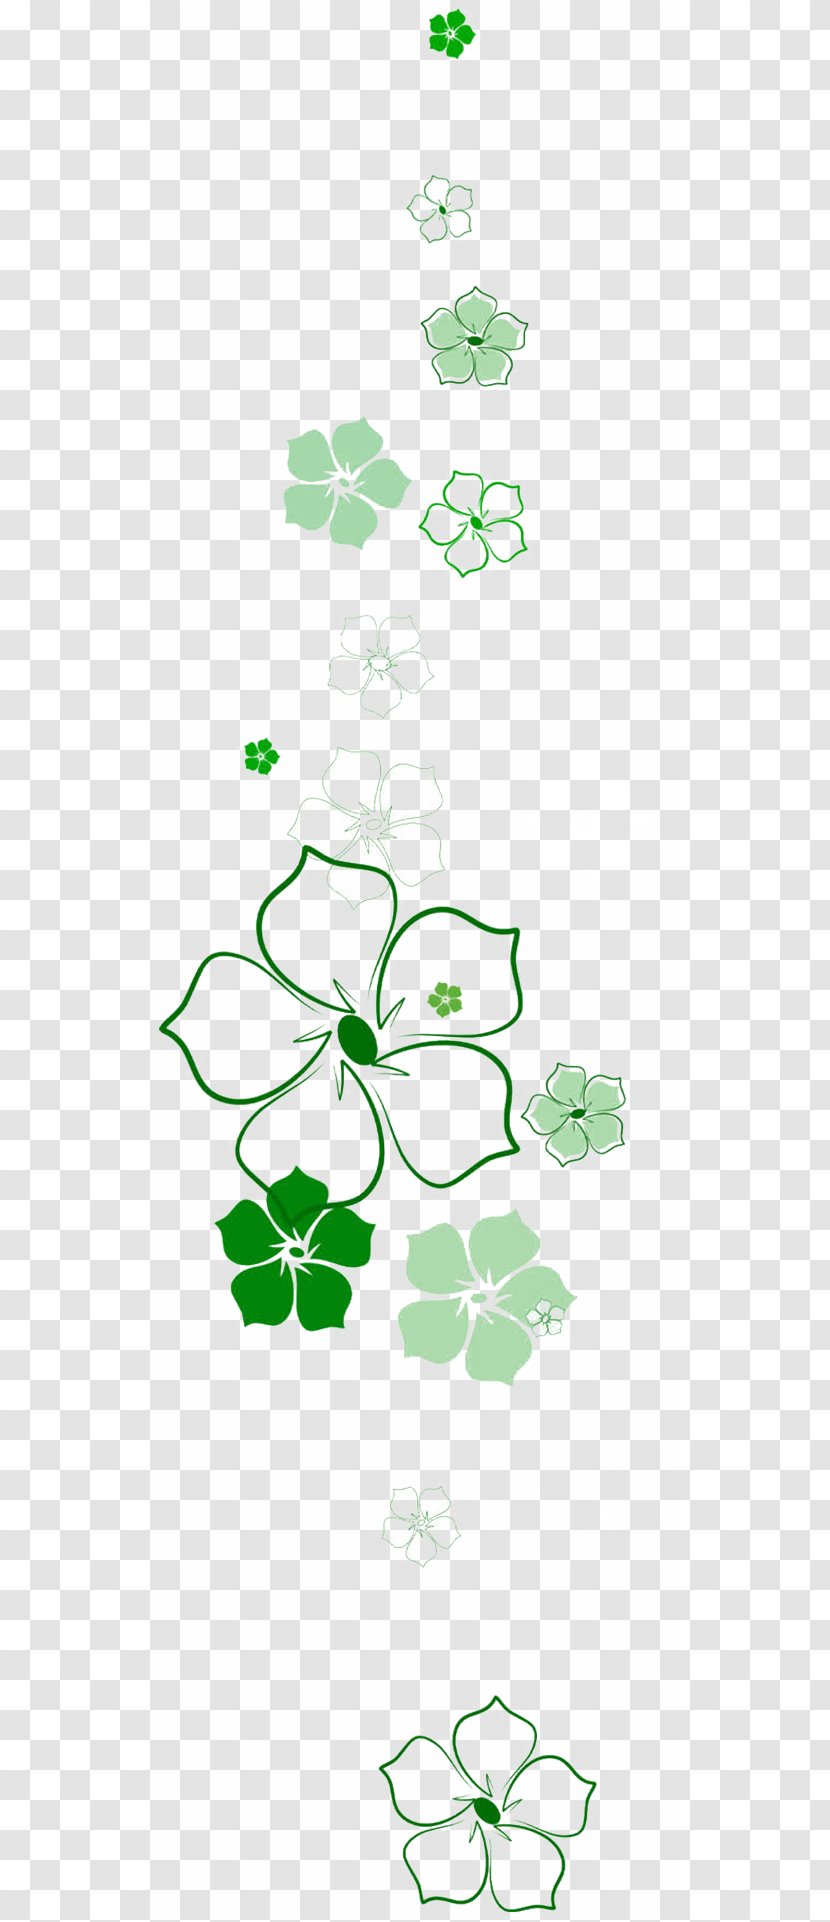 Green - Text - Small Floral Background Transparent PNG